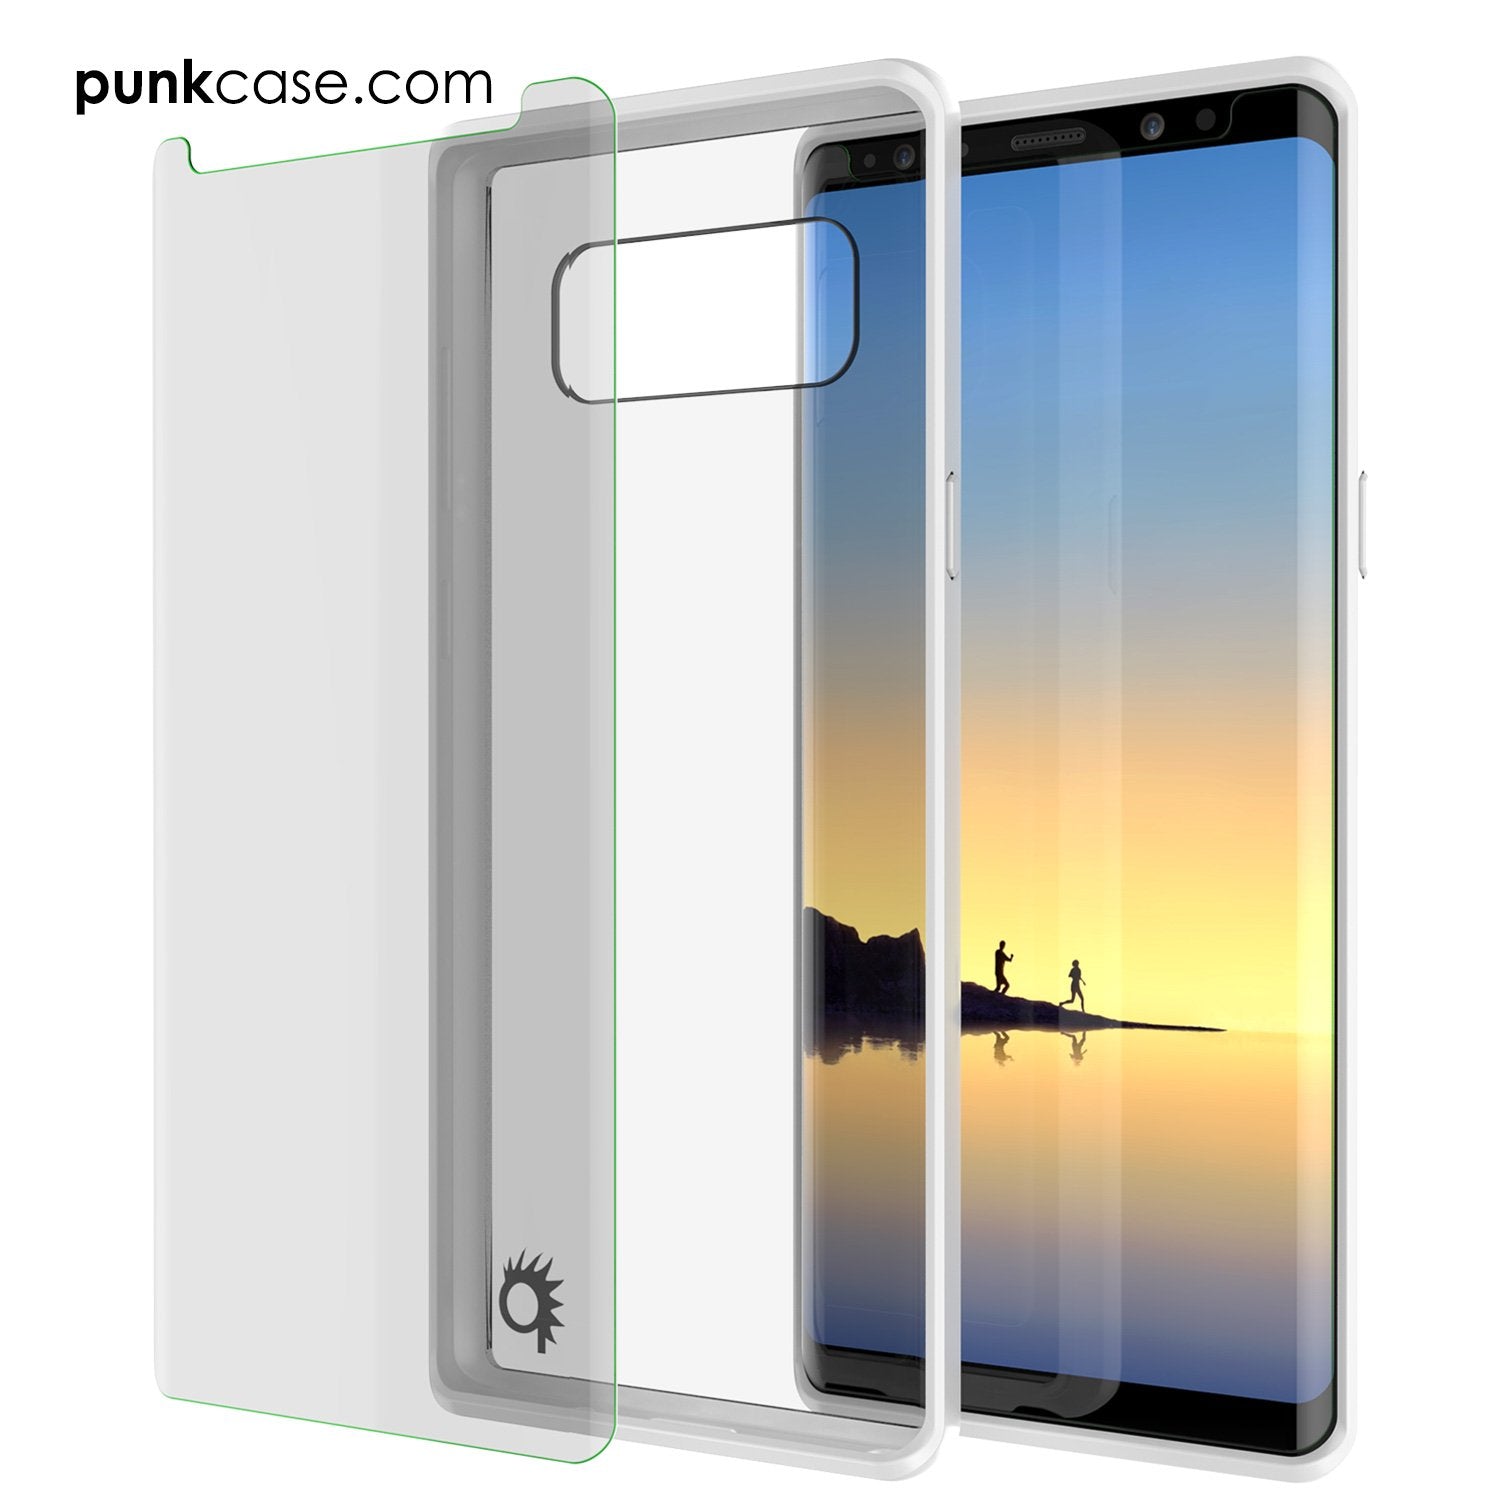 Galaxy Note 8 Case, PUNKcase [LUCID 2.0 Series] [Slim Fit] Armor Cover w/Integrated Anti-Shock System & PUNKSHIELD Screen Protector [White] - PunkCase NZ